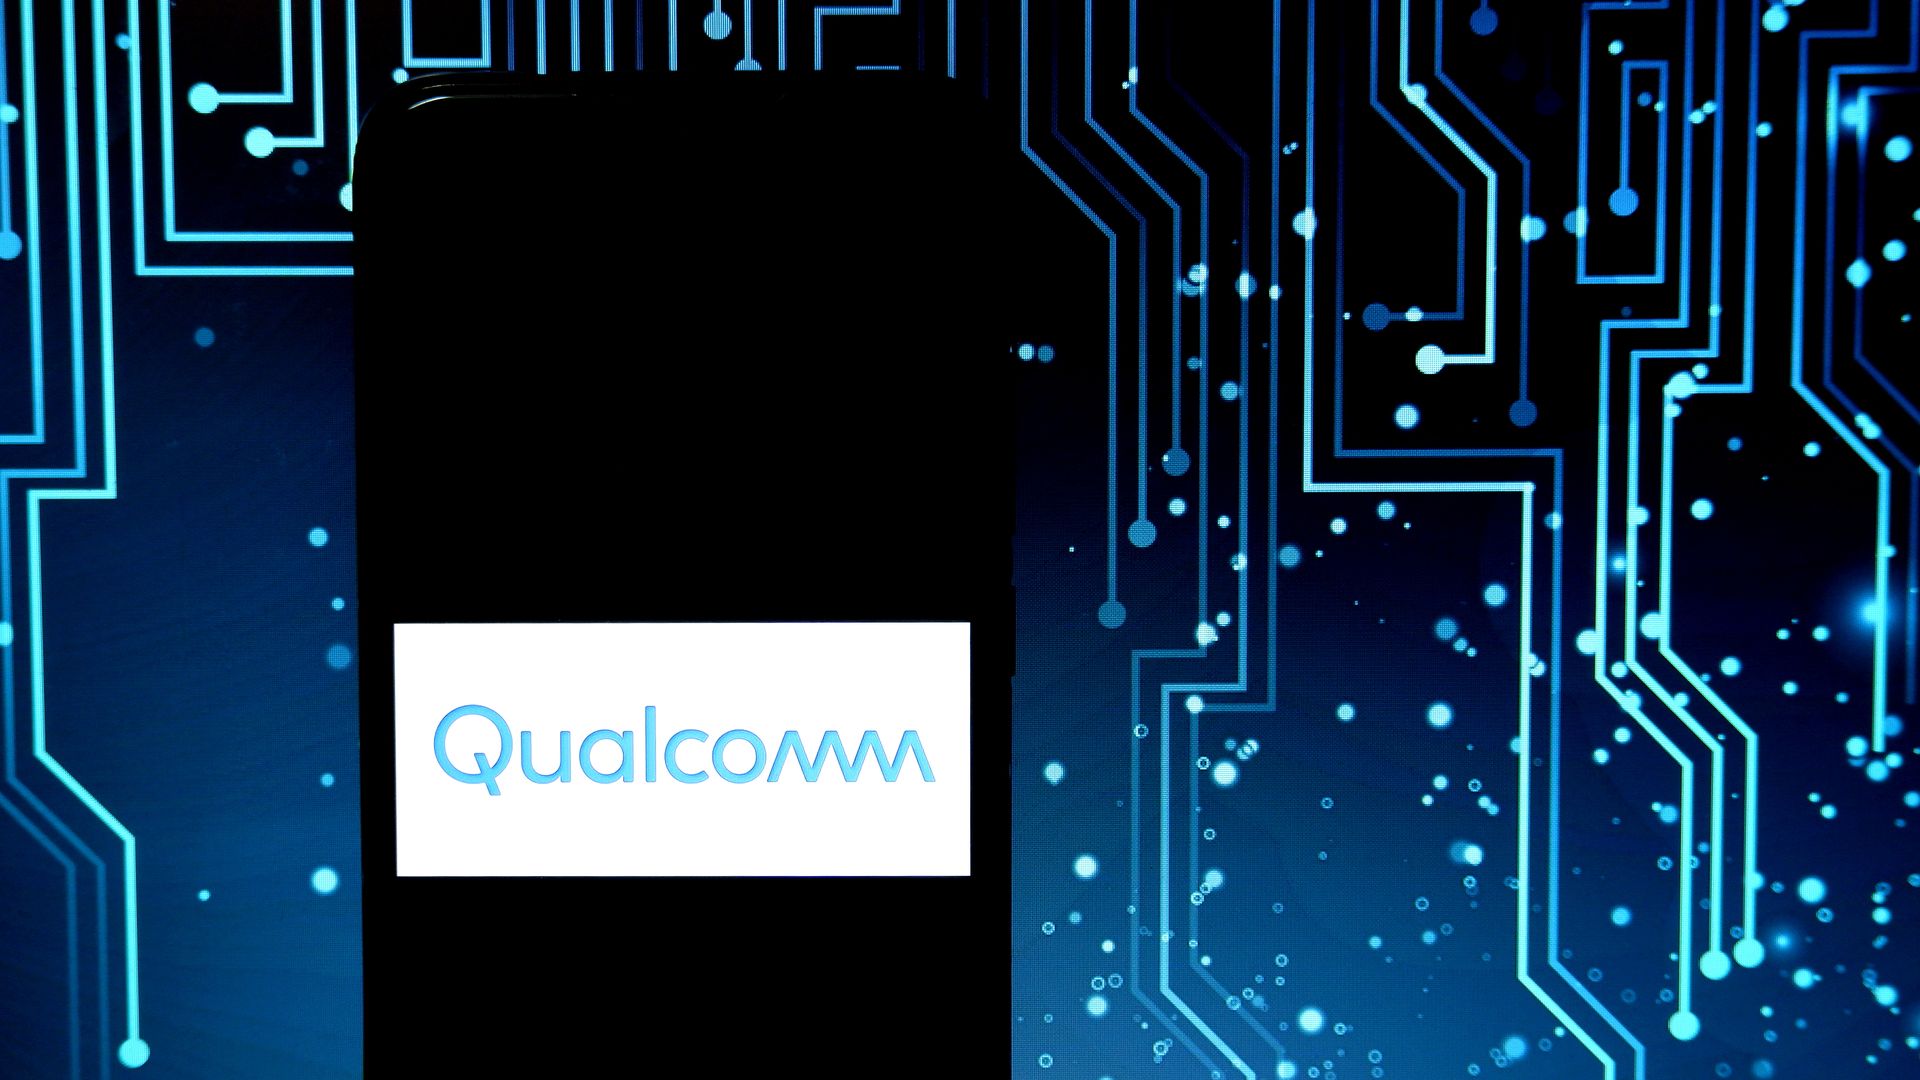 A photo illustration of the Qualcomm logo displayed on a smartphone with a graphic depicting a circuitboard behind it.